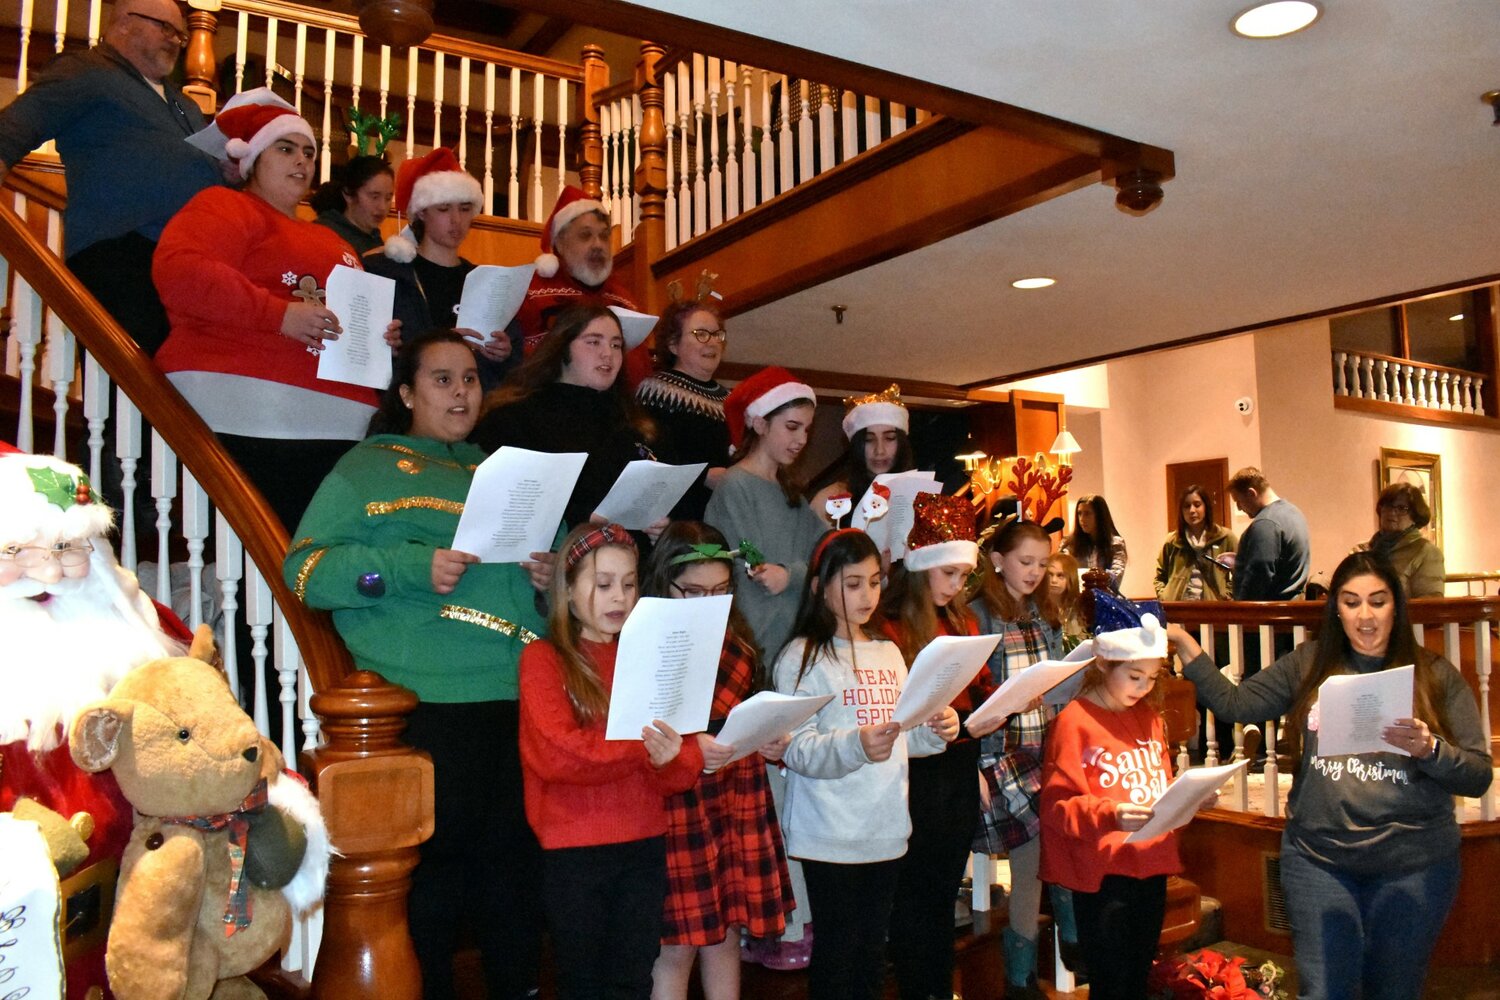 Christmas caroling was at its best thanks to the talents of the Bristol Theatre Co.